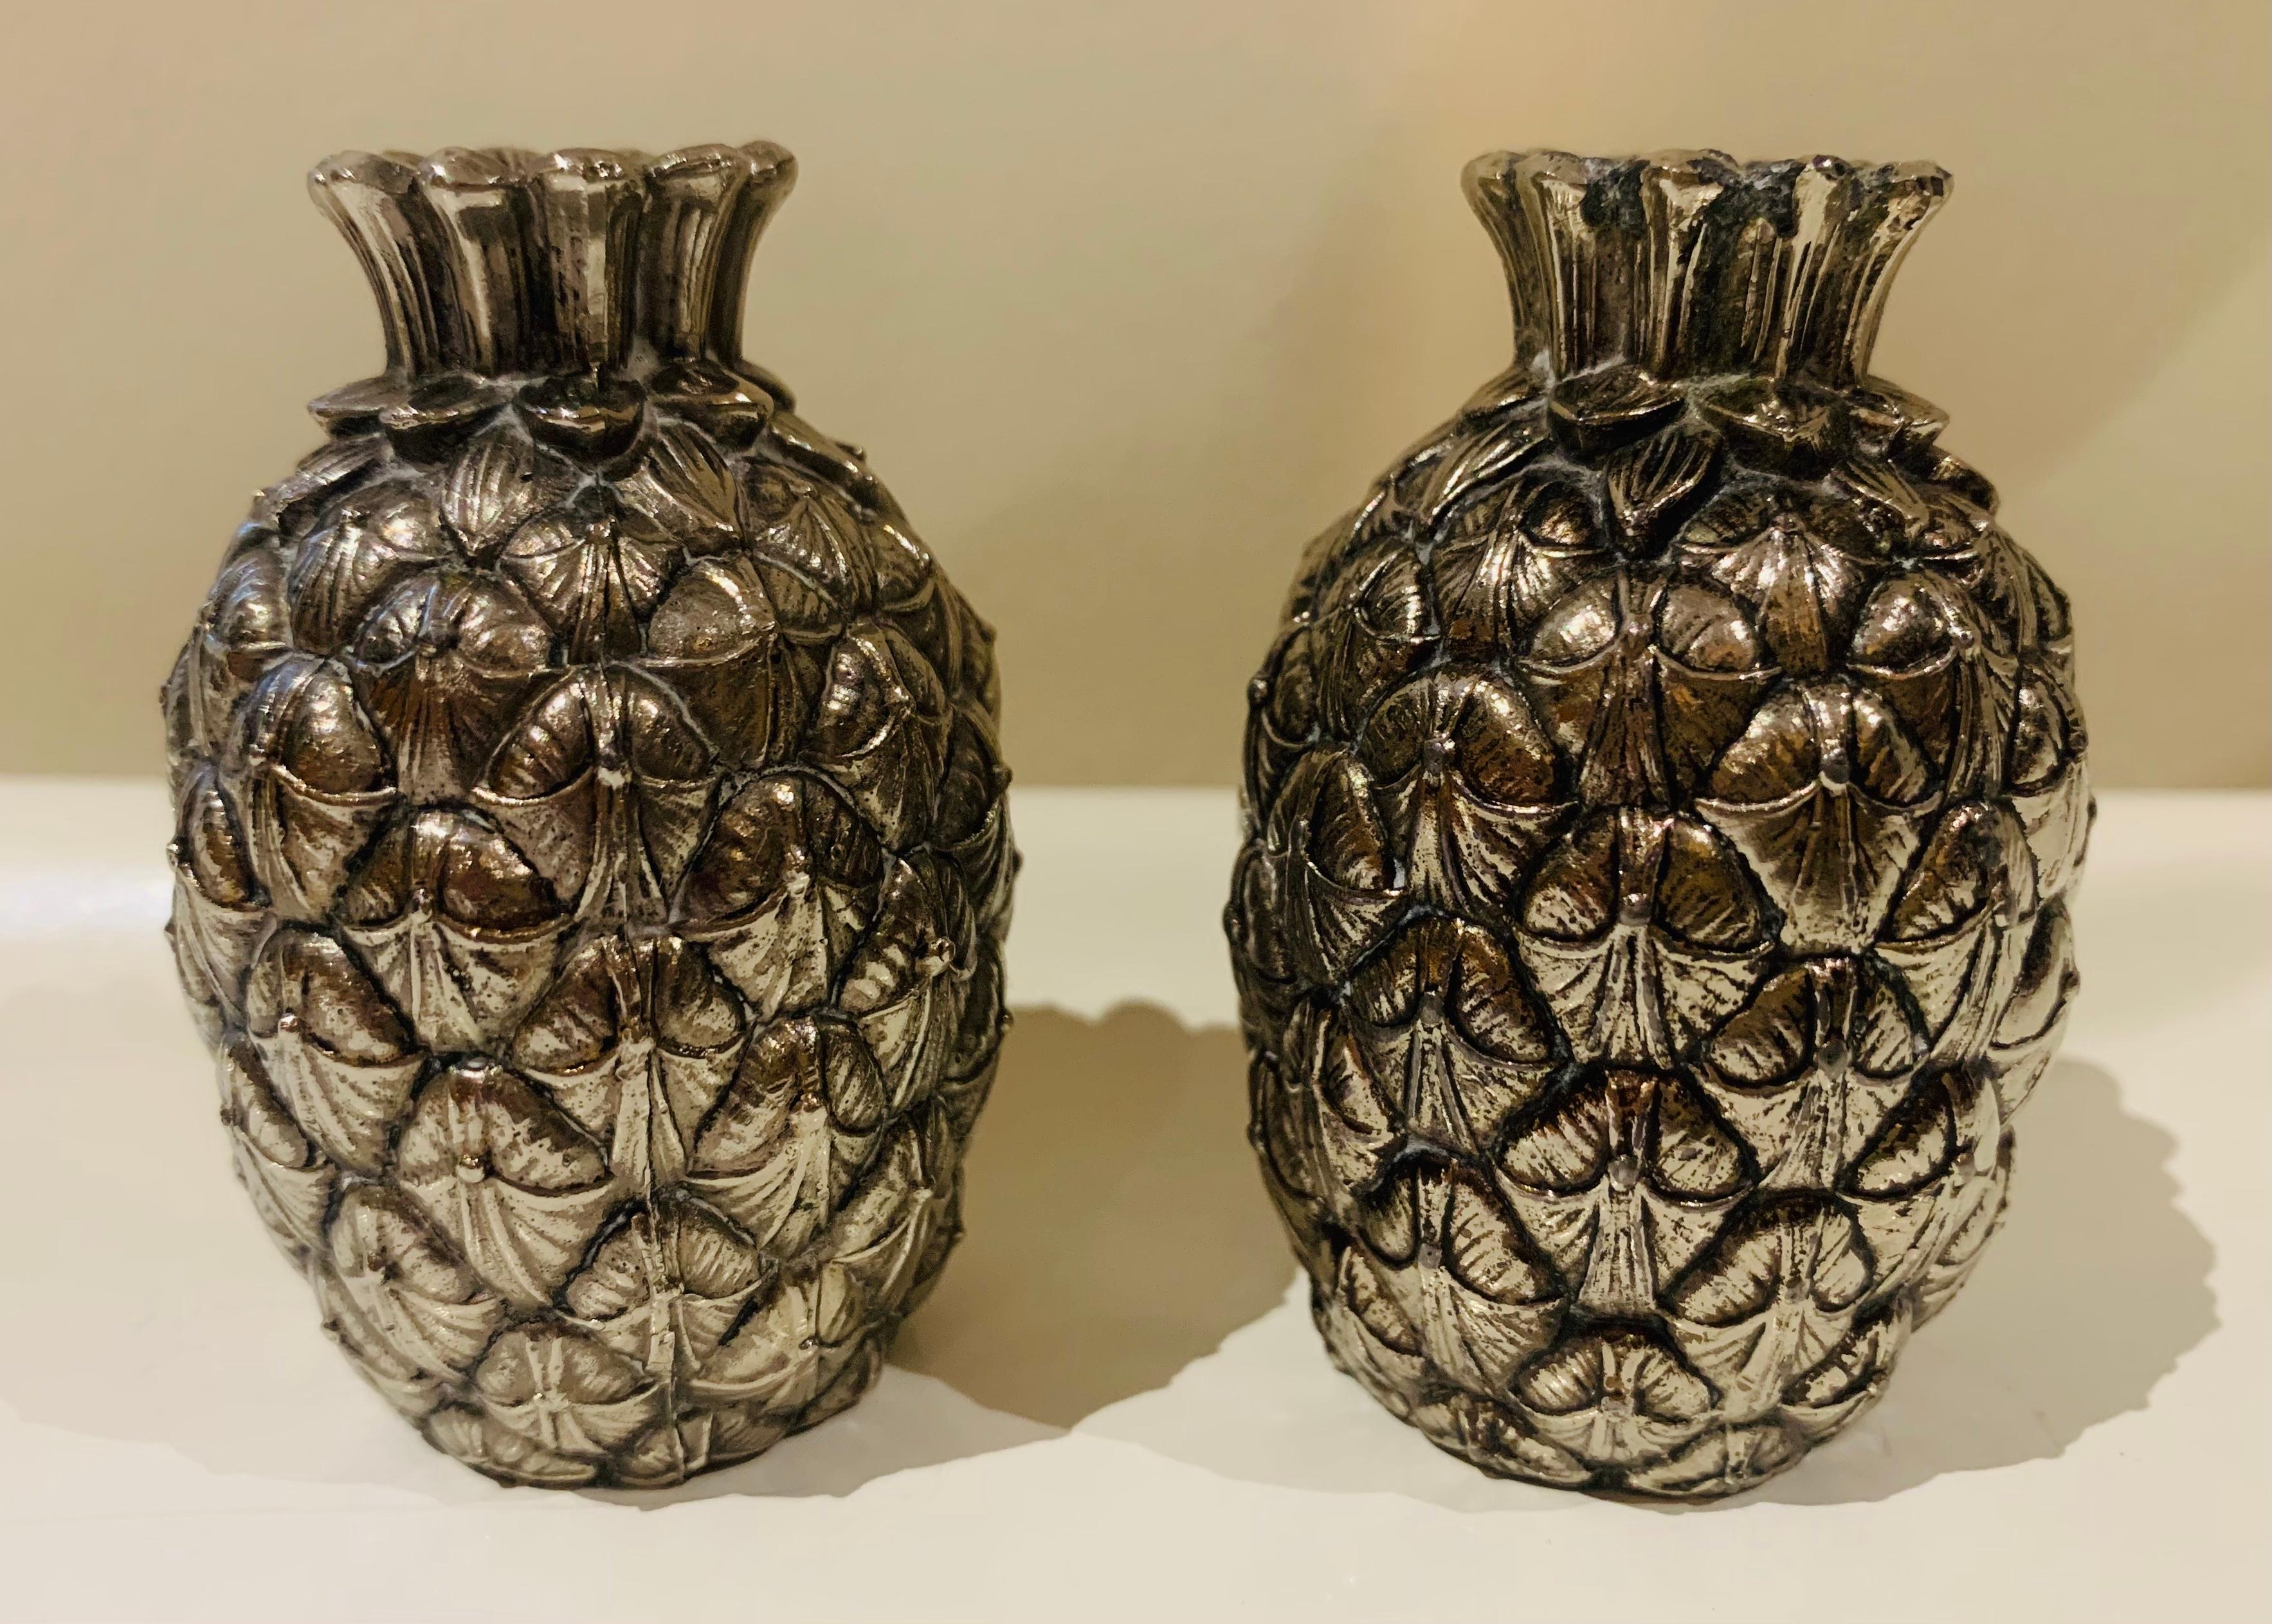 1970s Italian silver pineapple shaped salt and pepper shakers designed by Mauro Manetti in Firenze. Manetti is well known for his highly decorative sculptural barware and tableware in different forms such as ducks, owls, acorns in both gold and